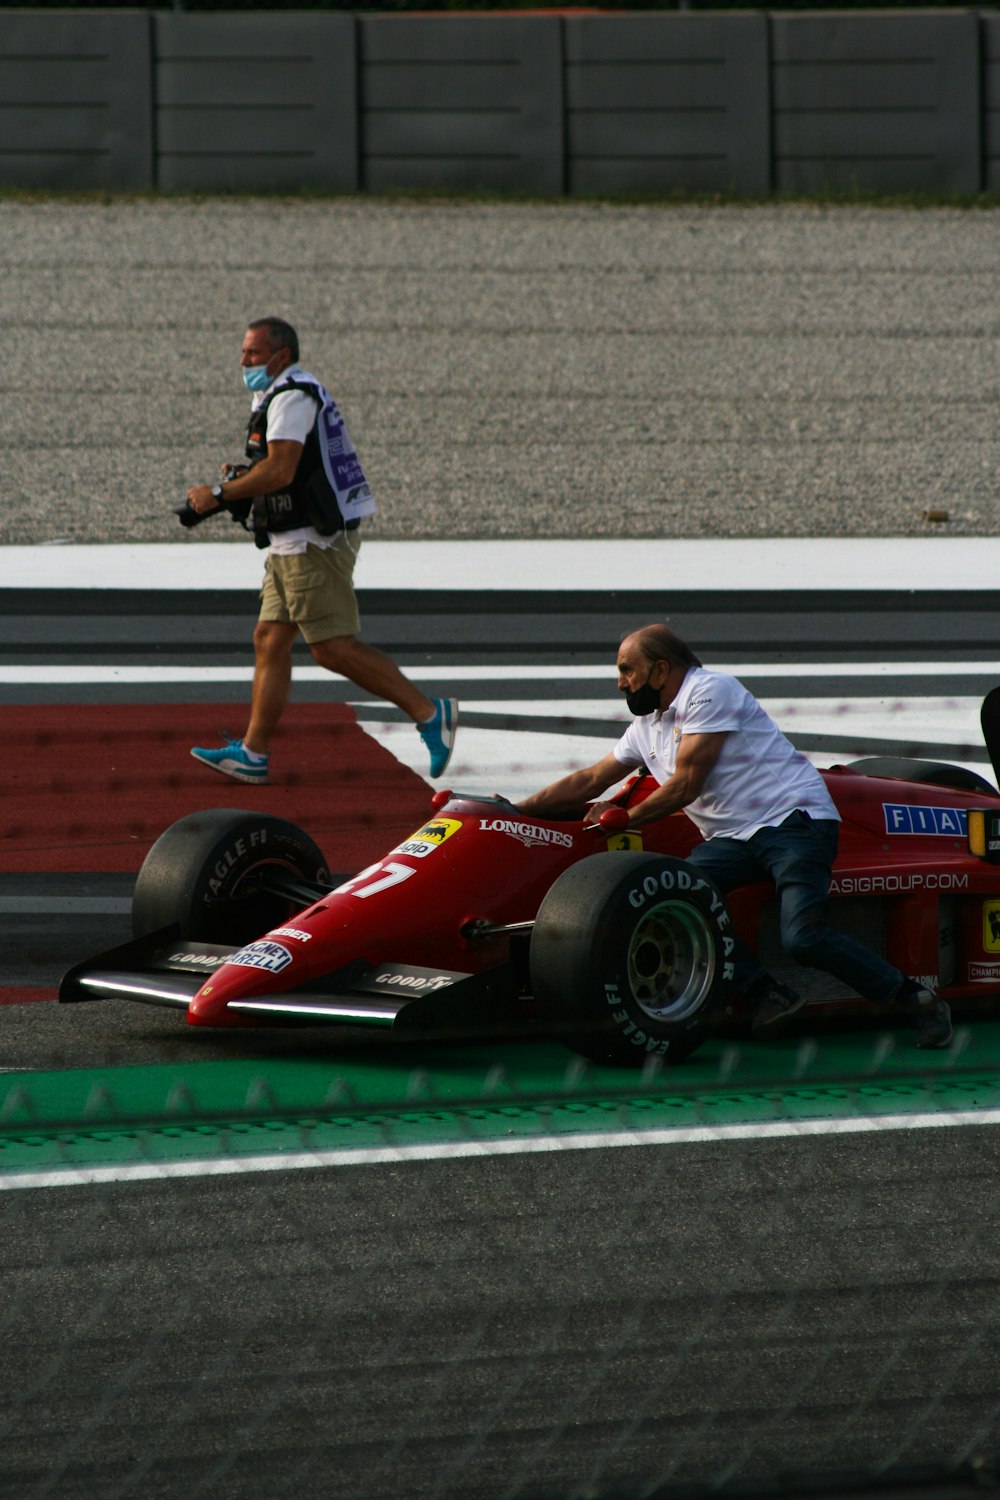 a man is pushing a race car on the track